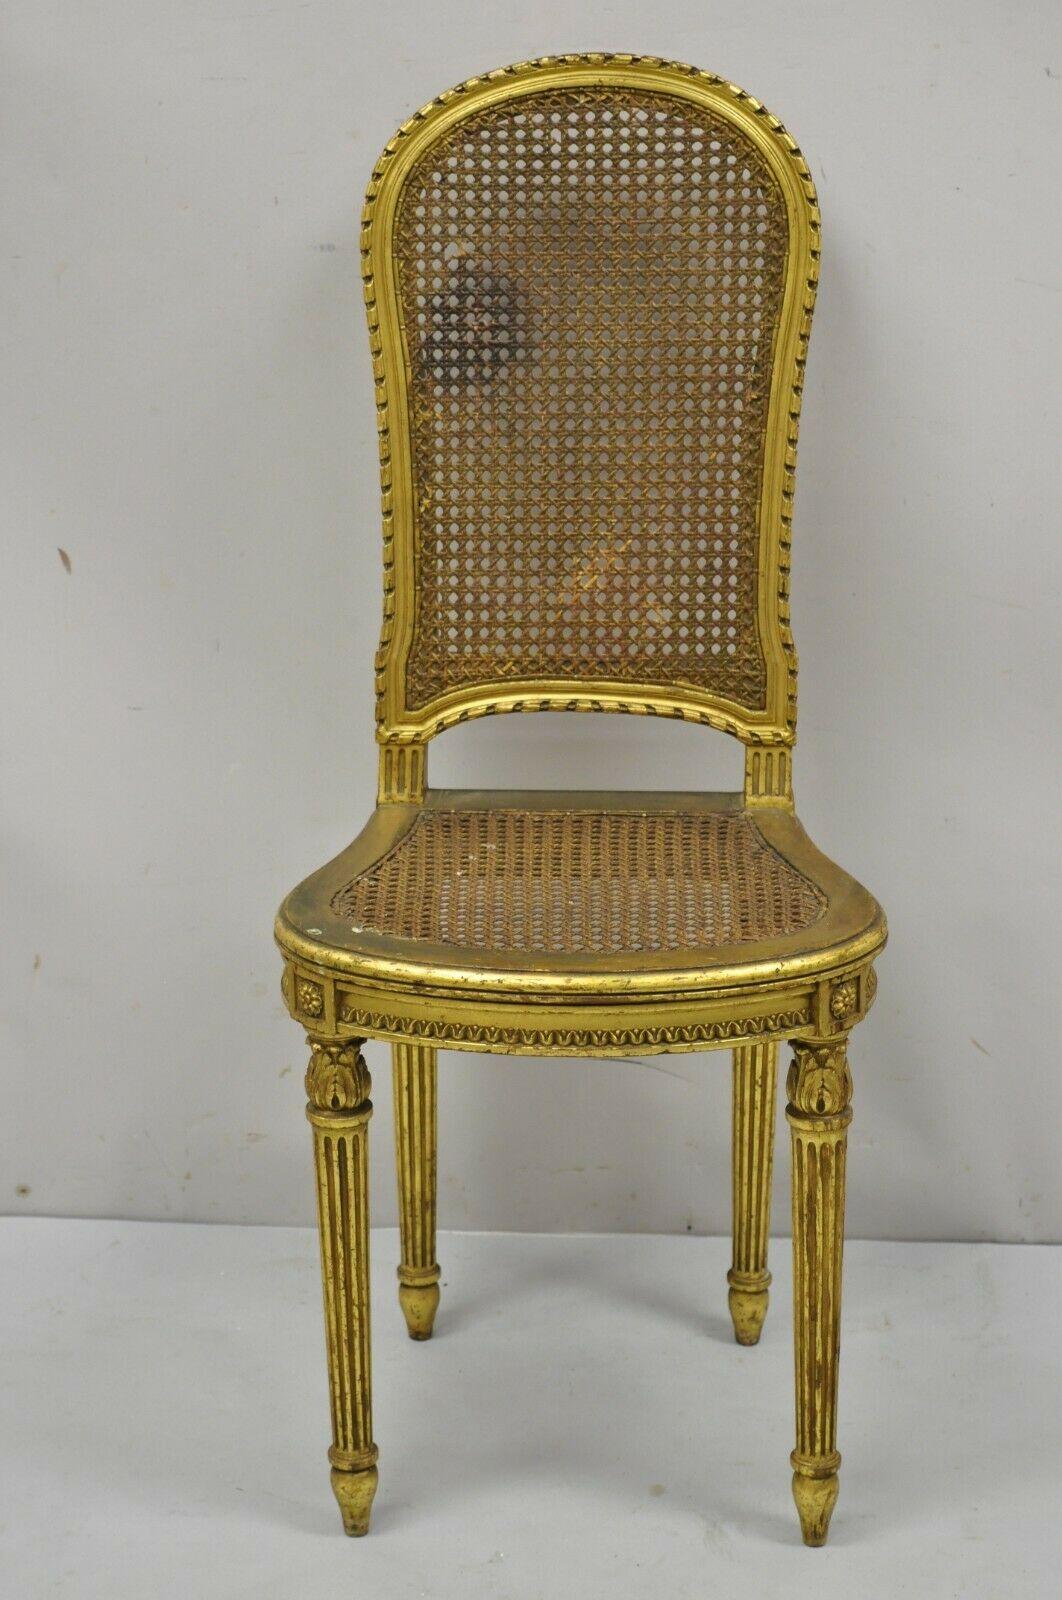 Antique Victorian French Louis XV Style Gold Giltwood and Cane Boudoir Side Chair. Item features a gold gilt finish, cane back and seat, solid wood frame, distressed finish, nicely carved details, tapered legs, very nice antique item, great style